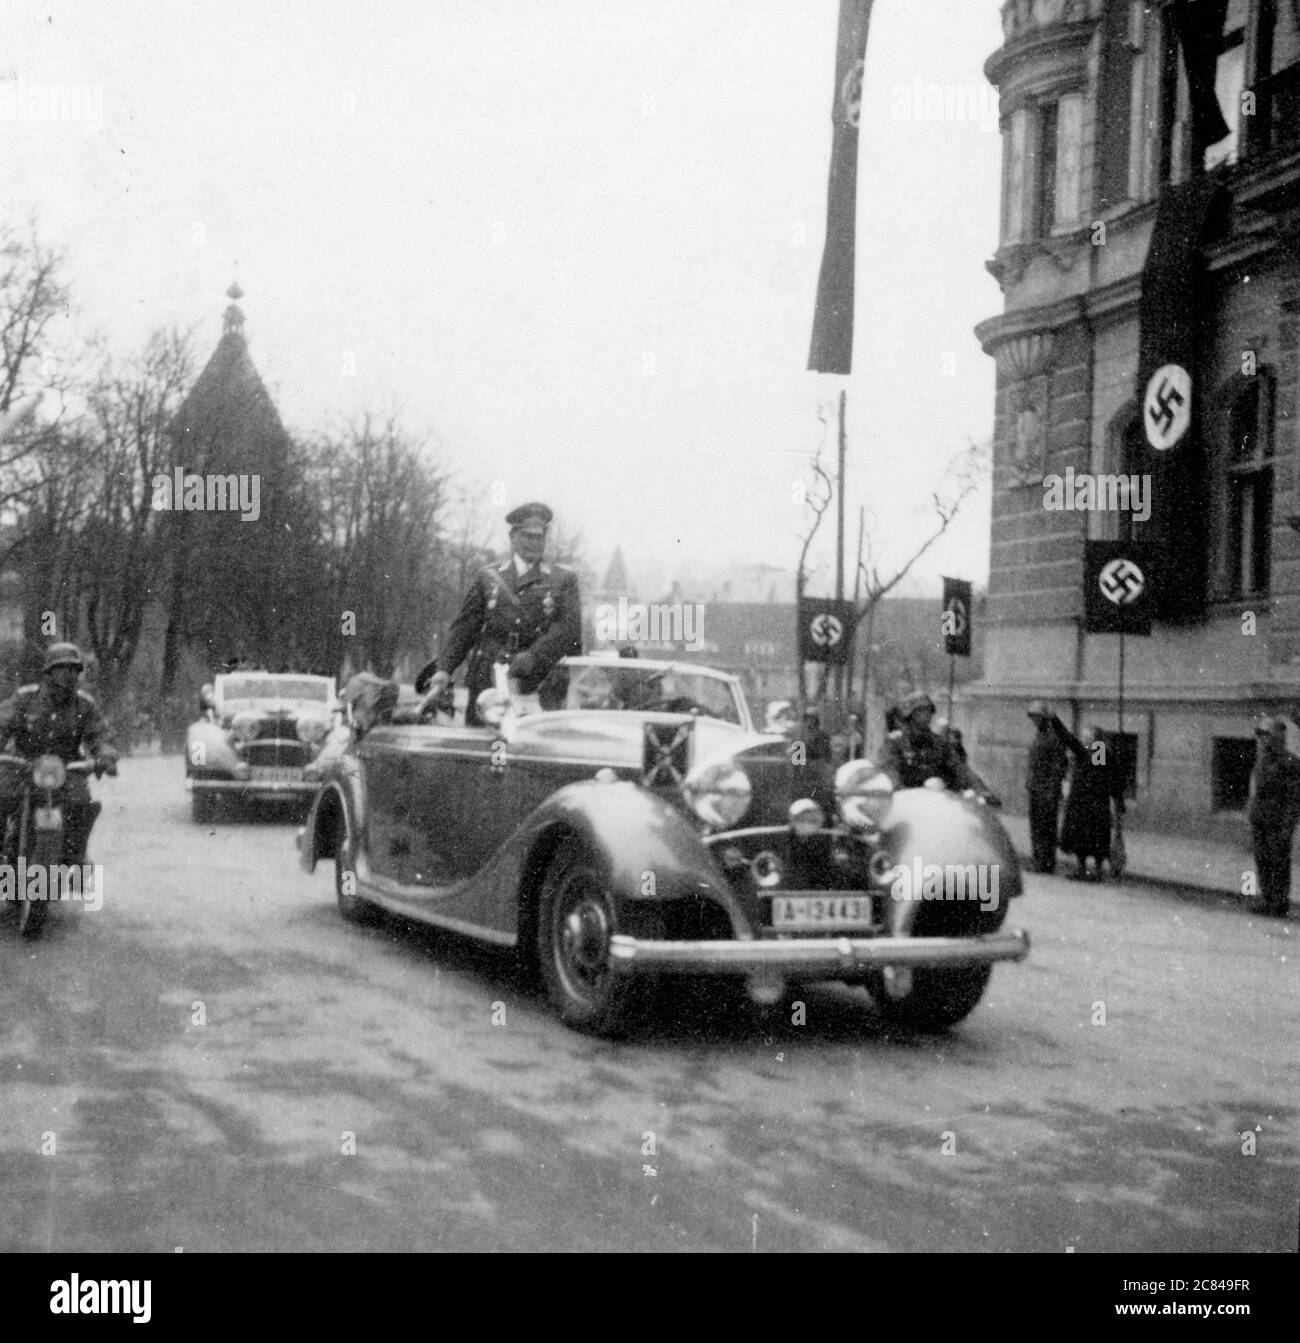 Göring, Hermann, 12.1.1893 - 15.10.1946, German politican, (NSDAP), prime minister of Prussia on his Horch 853 cabriolet, Auto Union, mars 1938 Stock Photo